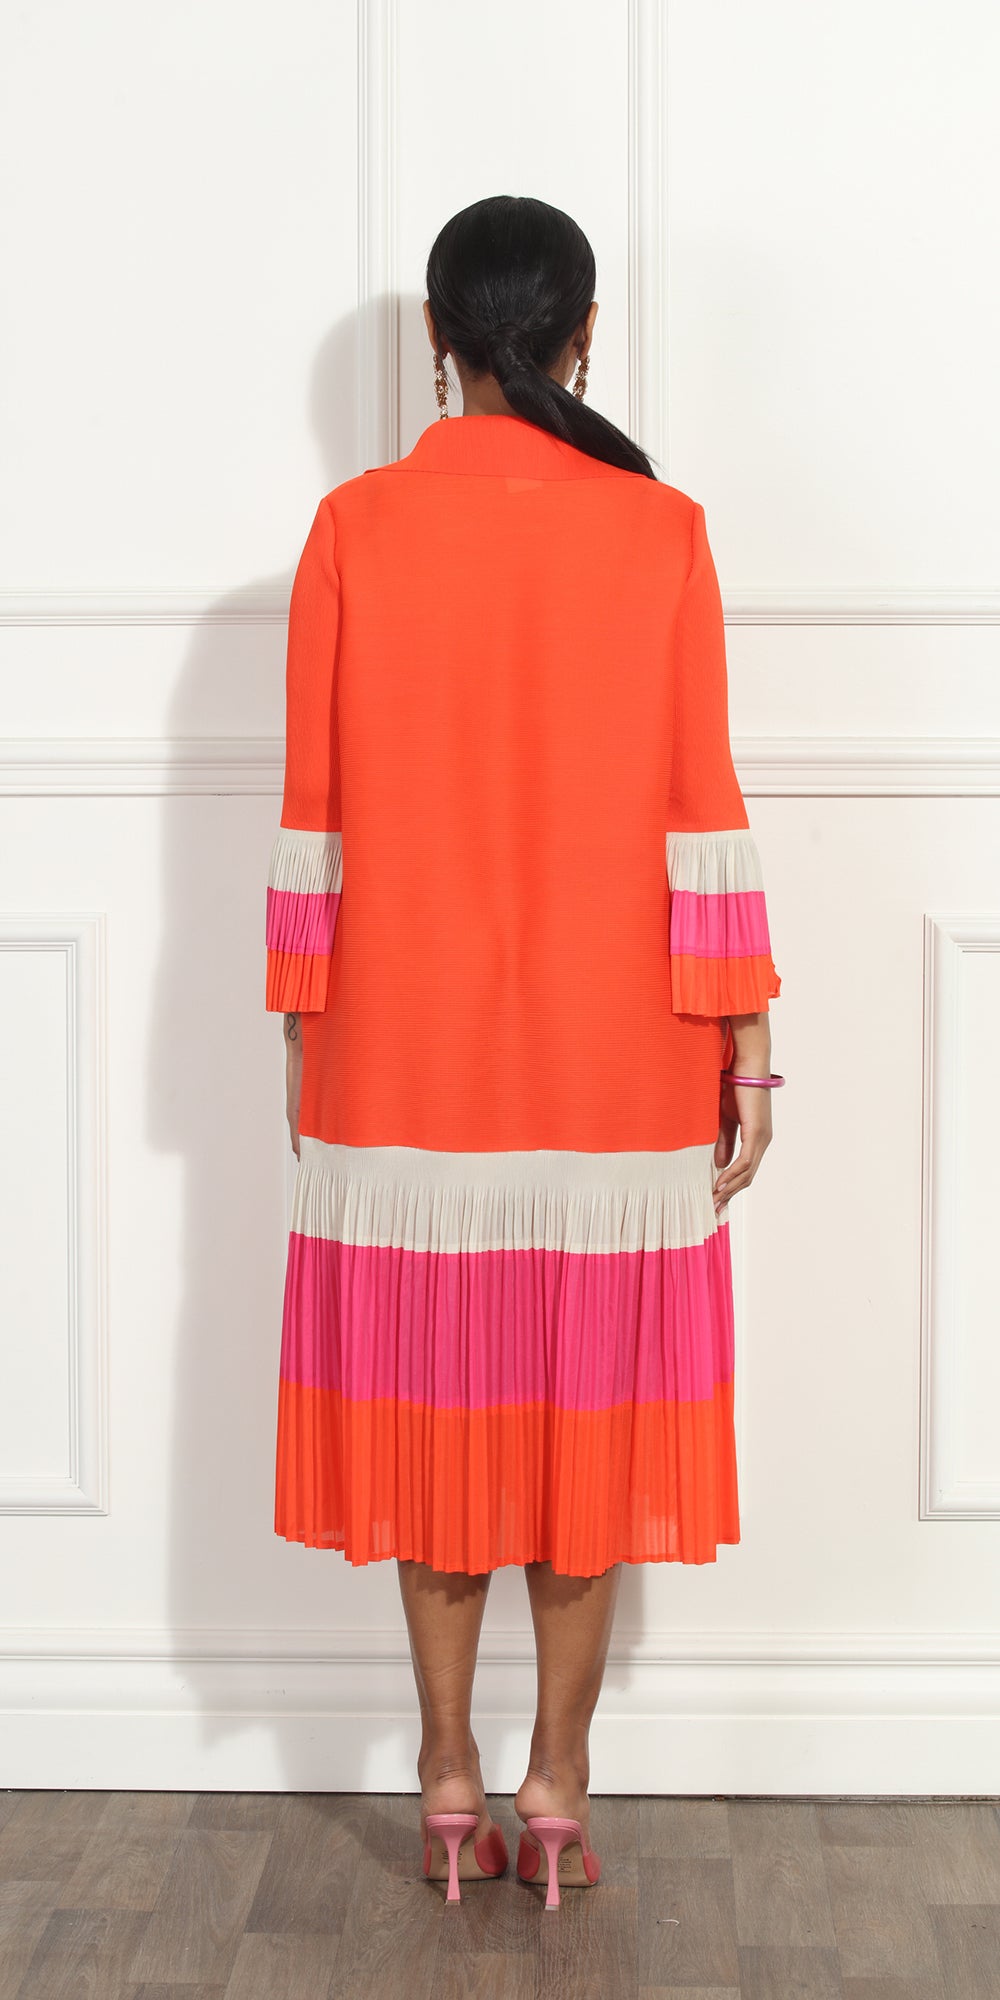 Luxe Moda LM302 - Orange - Dress with Pleated Stripe Skirt and Cuffs